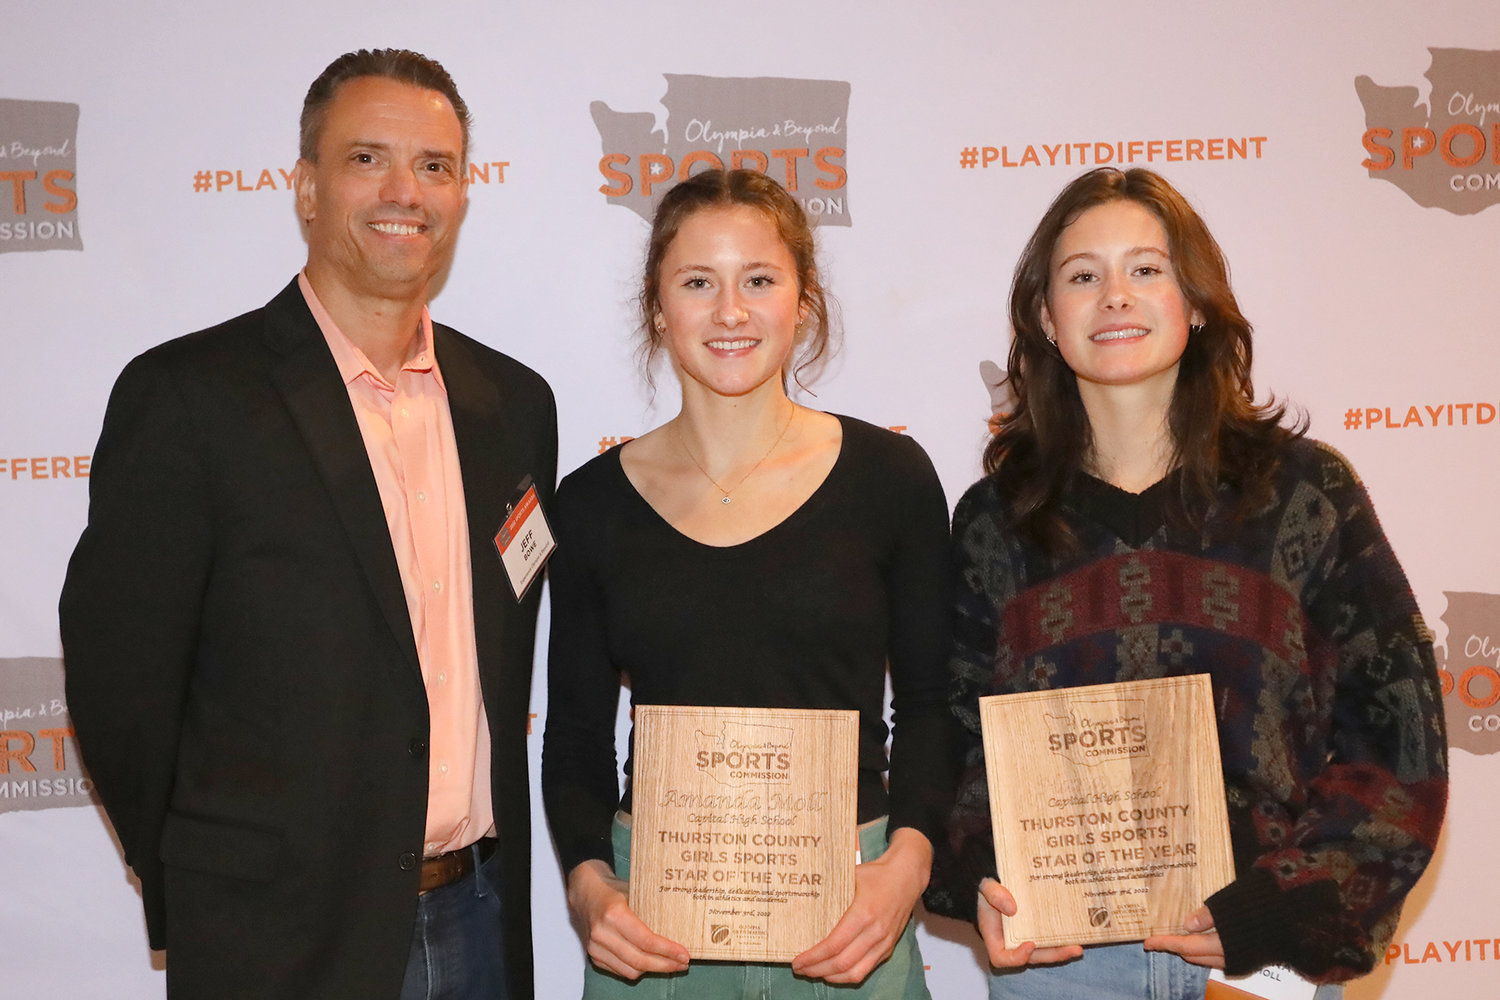 Olympia and Beyond's Jeff Bowes with Track and Field Sports Stars of the Year Amanda and Hana Moll of Capital High School.